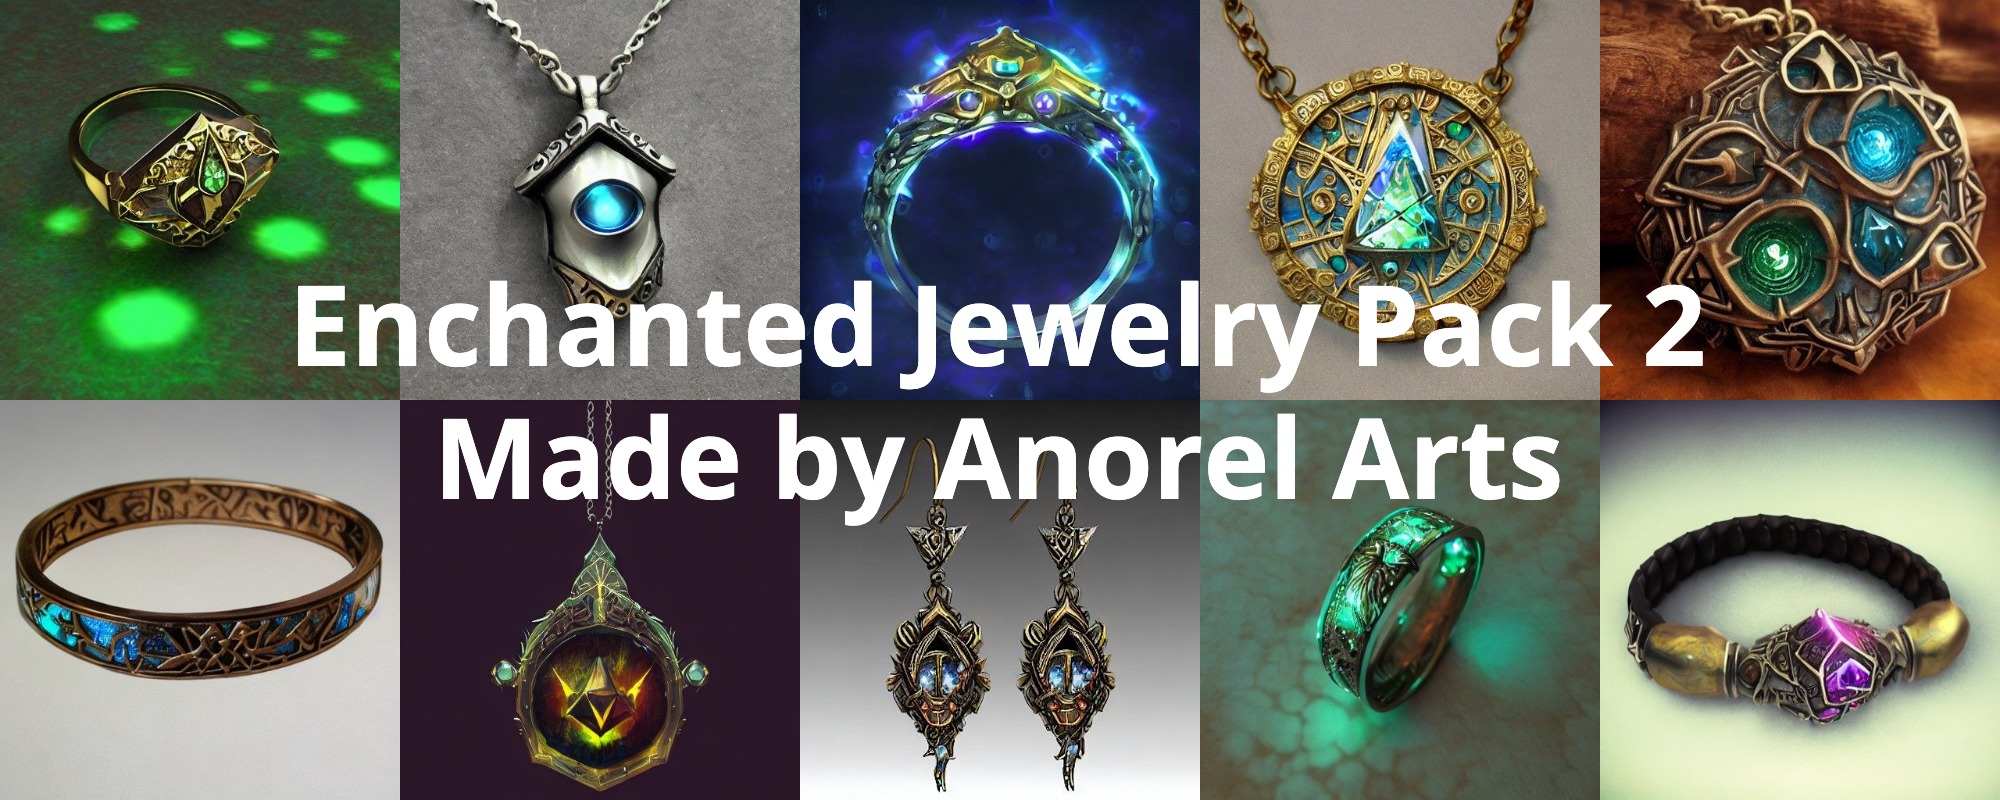 Enchanted Jewelry Pack 2